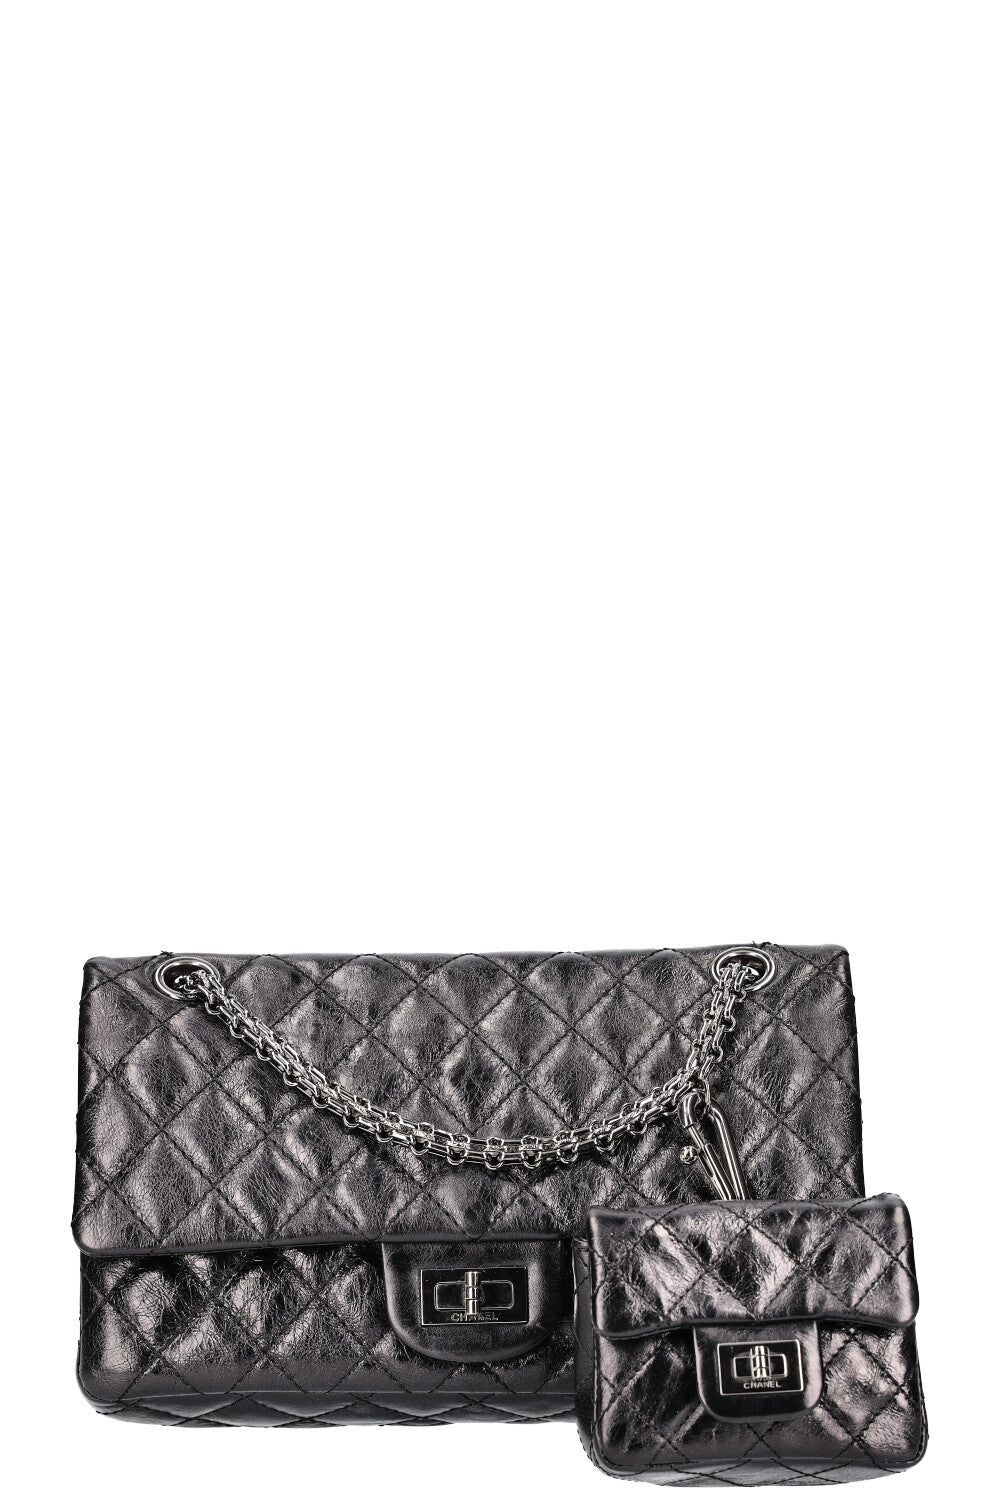 CHANEL Limited Edition 2.55 Small Black